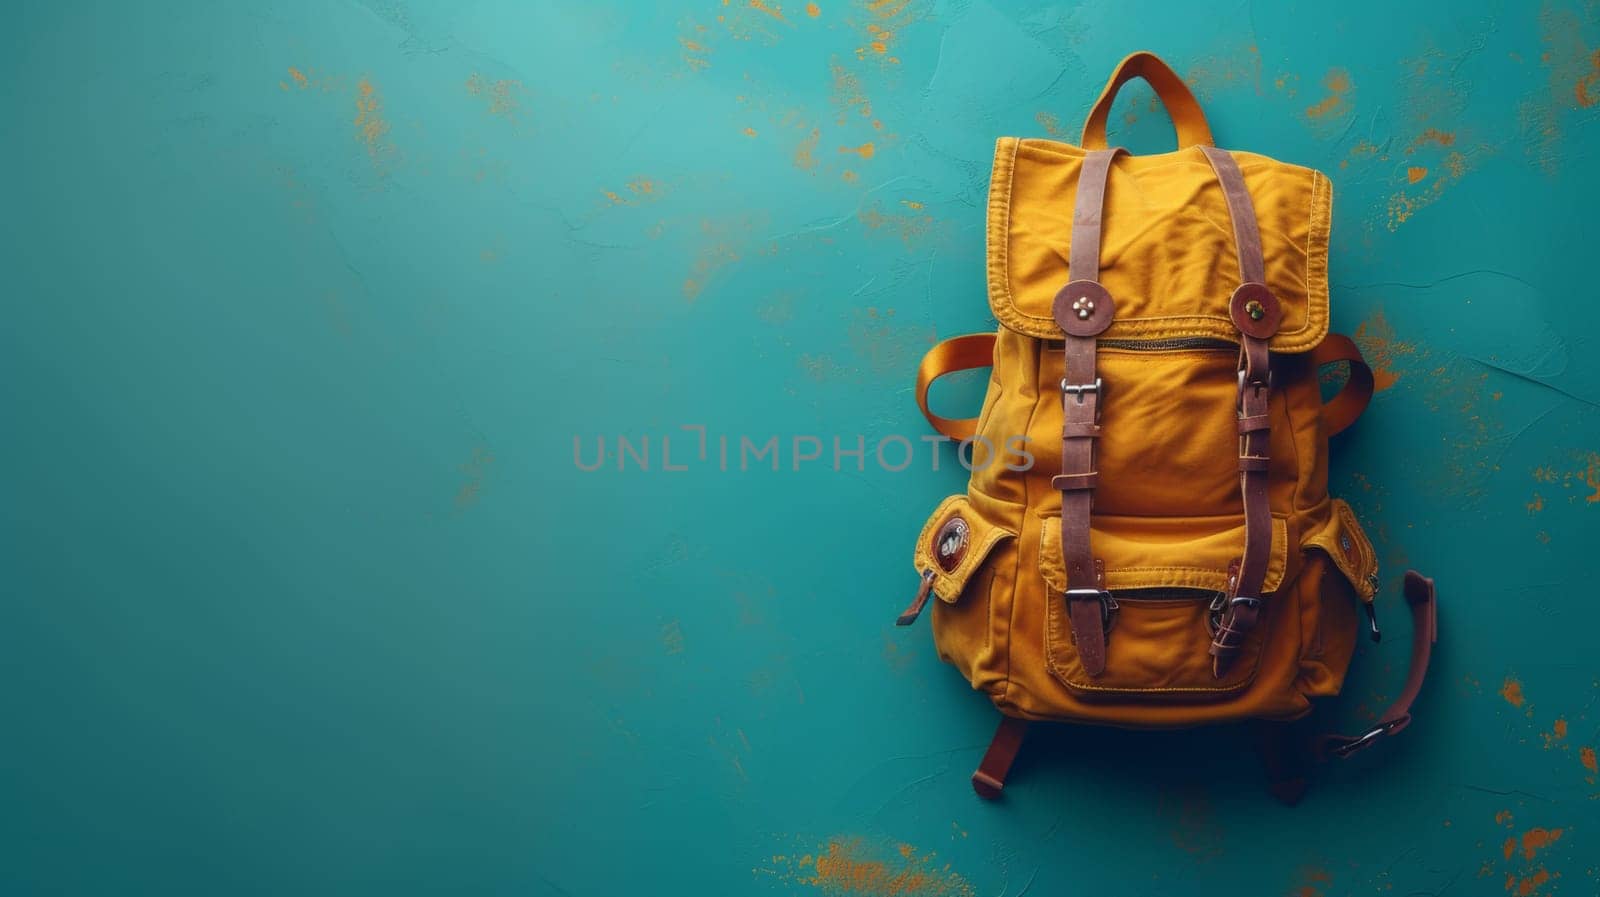 Printed backpack with an airplane on a colored background. Concept for World Tourism Day